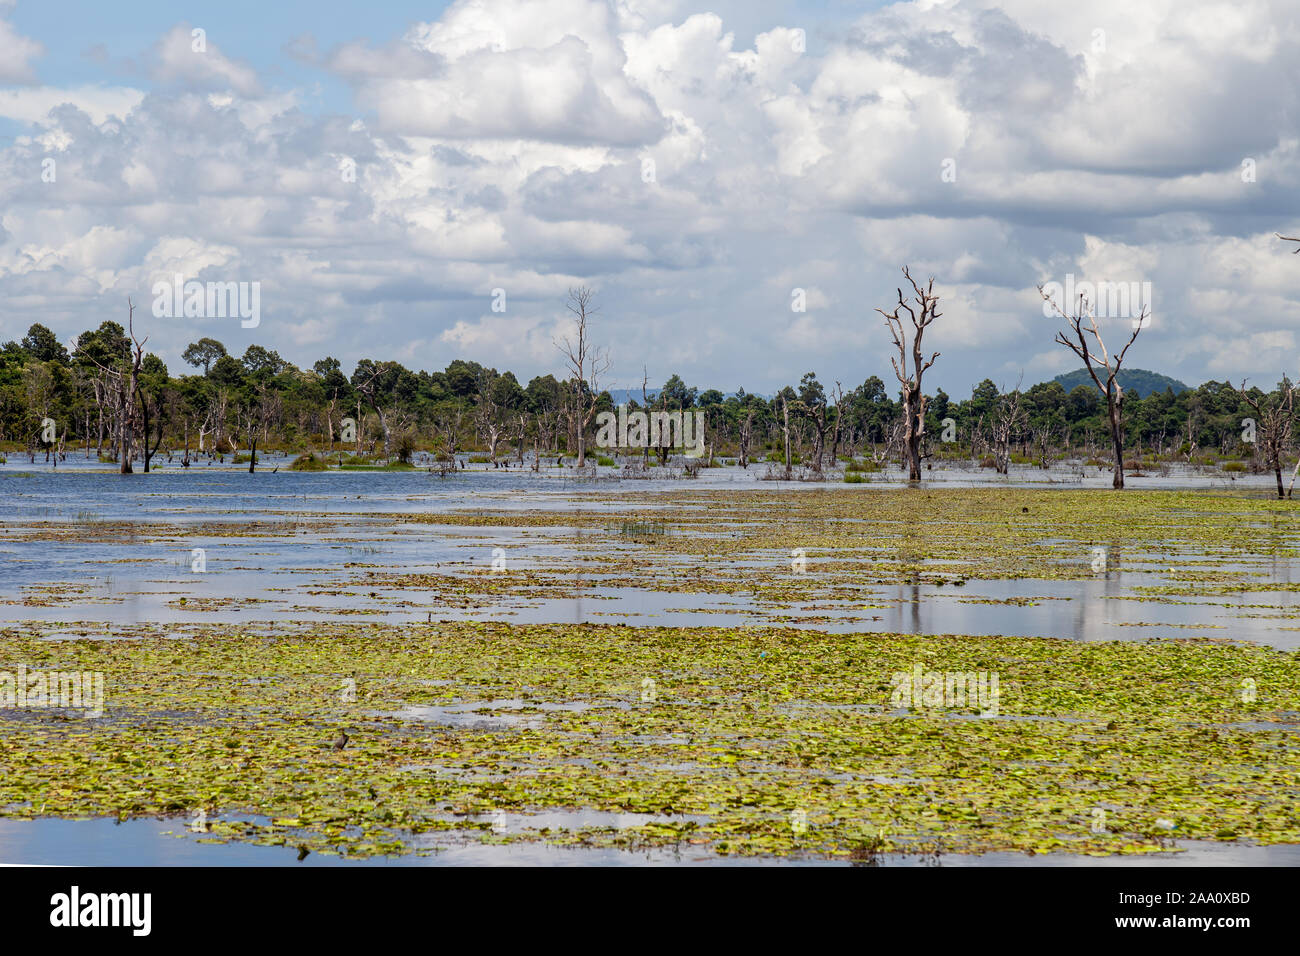 Flooded swamps in rainy season. Nice blue skies and white clouds reflect on the surface. Some plants are growing nicely with trees on the river banks. Stock Photo